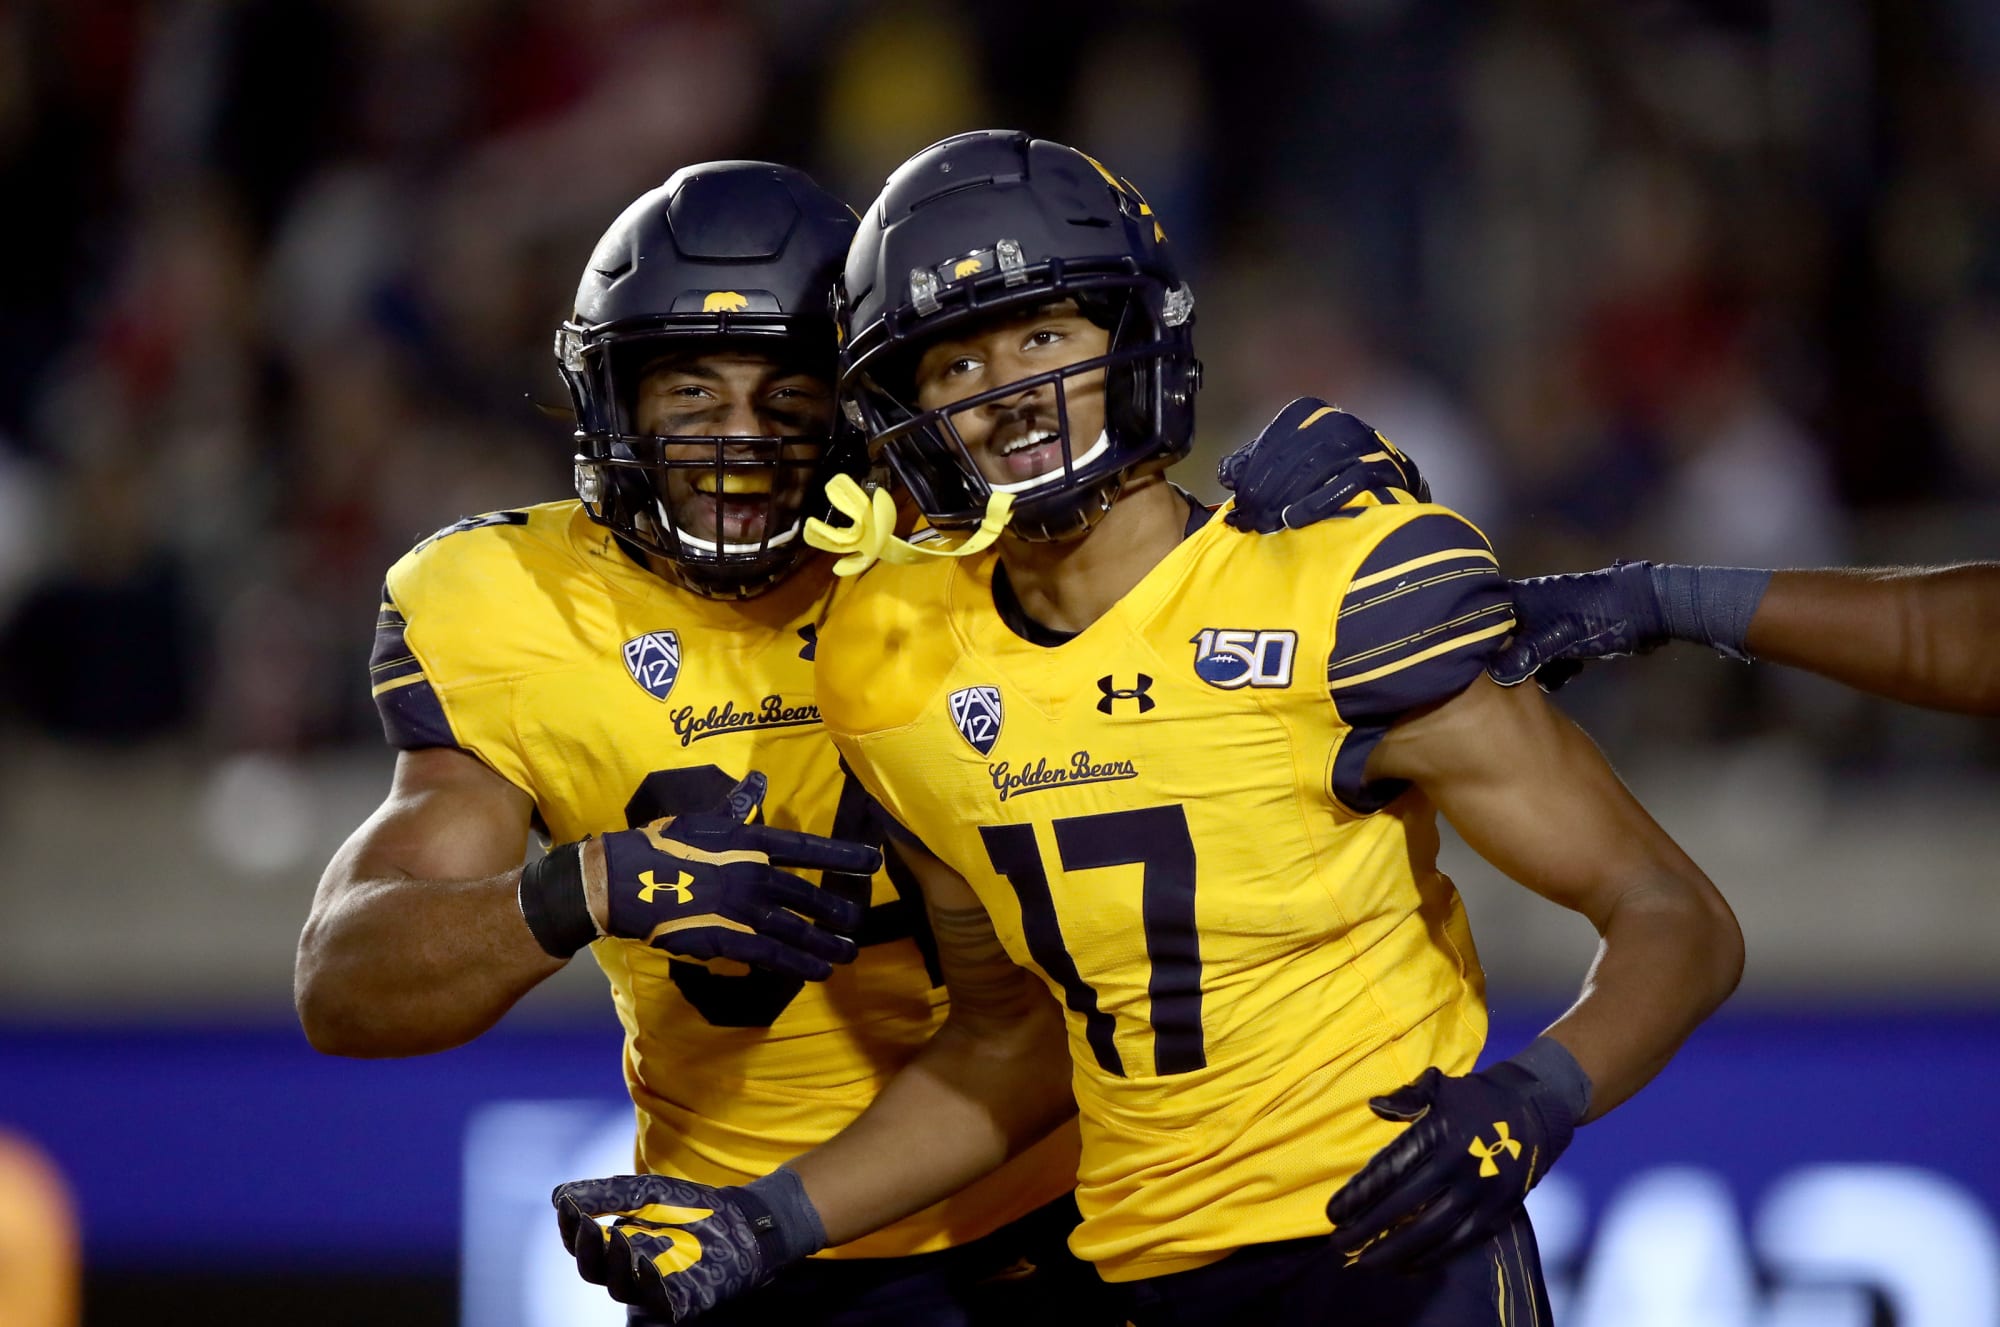 Cal Football What are the Bears' latest bowl odds/projections?